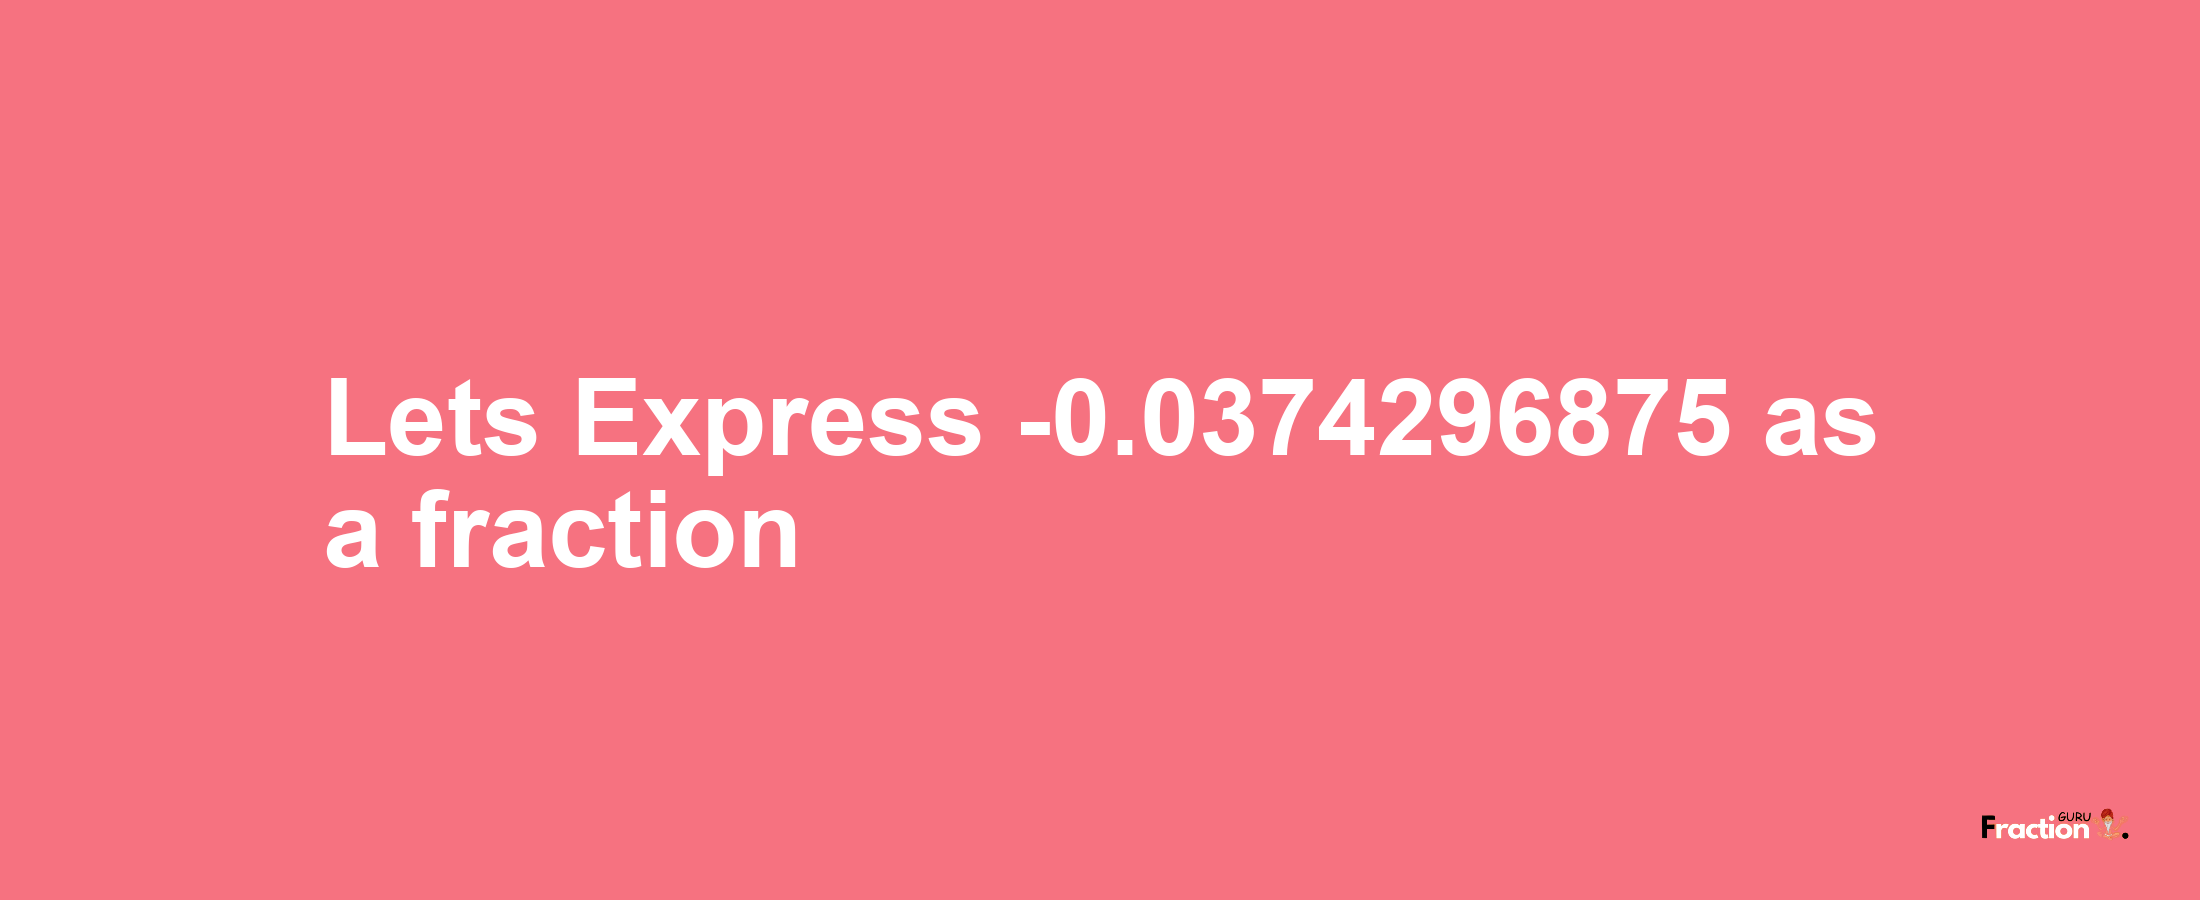 Lets Express -0.0374296875 as afraction